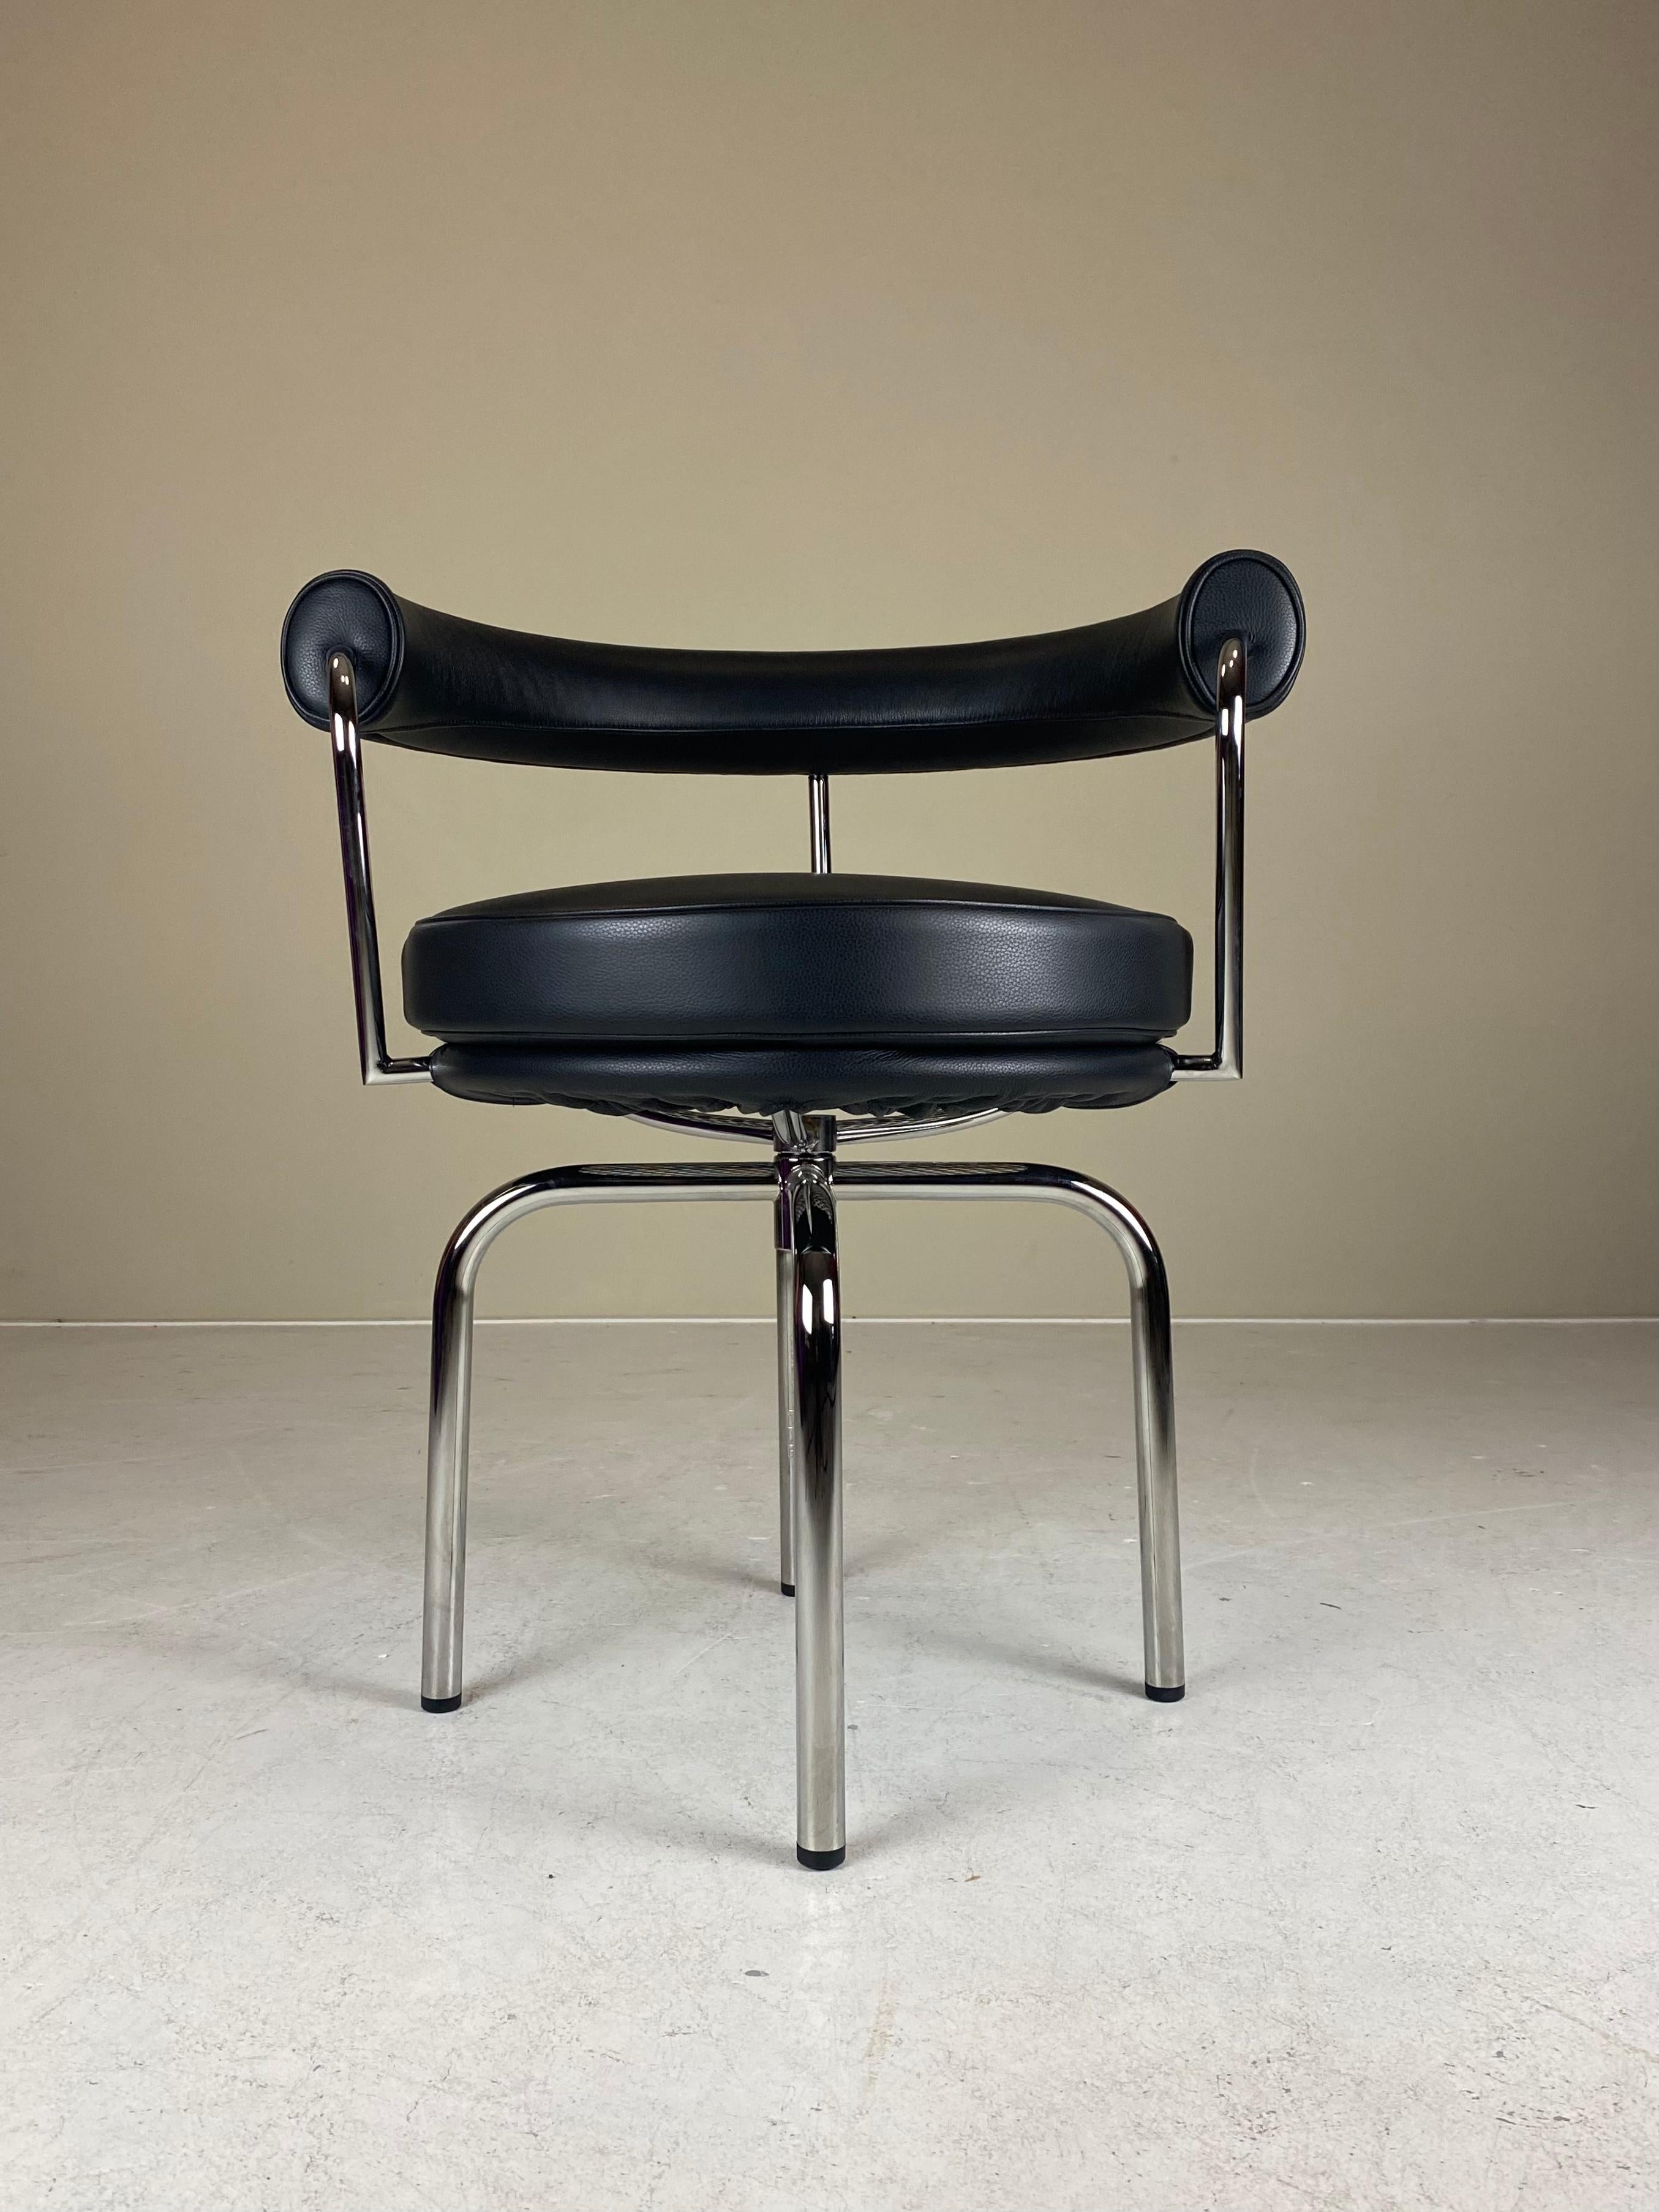 Easily the most elegant piece of Bauhaus design, the LC7 was an immediate hit at the Salon d'Automne in 1929 where it formed part of a collection that Charlotte Perriand co-created with Le Corbusier and Pierre Jeanneret. In fact, the chair was was